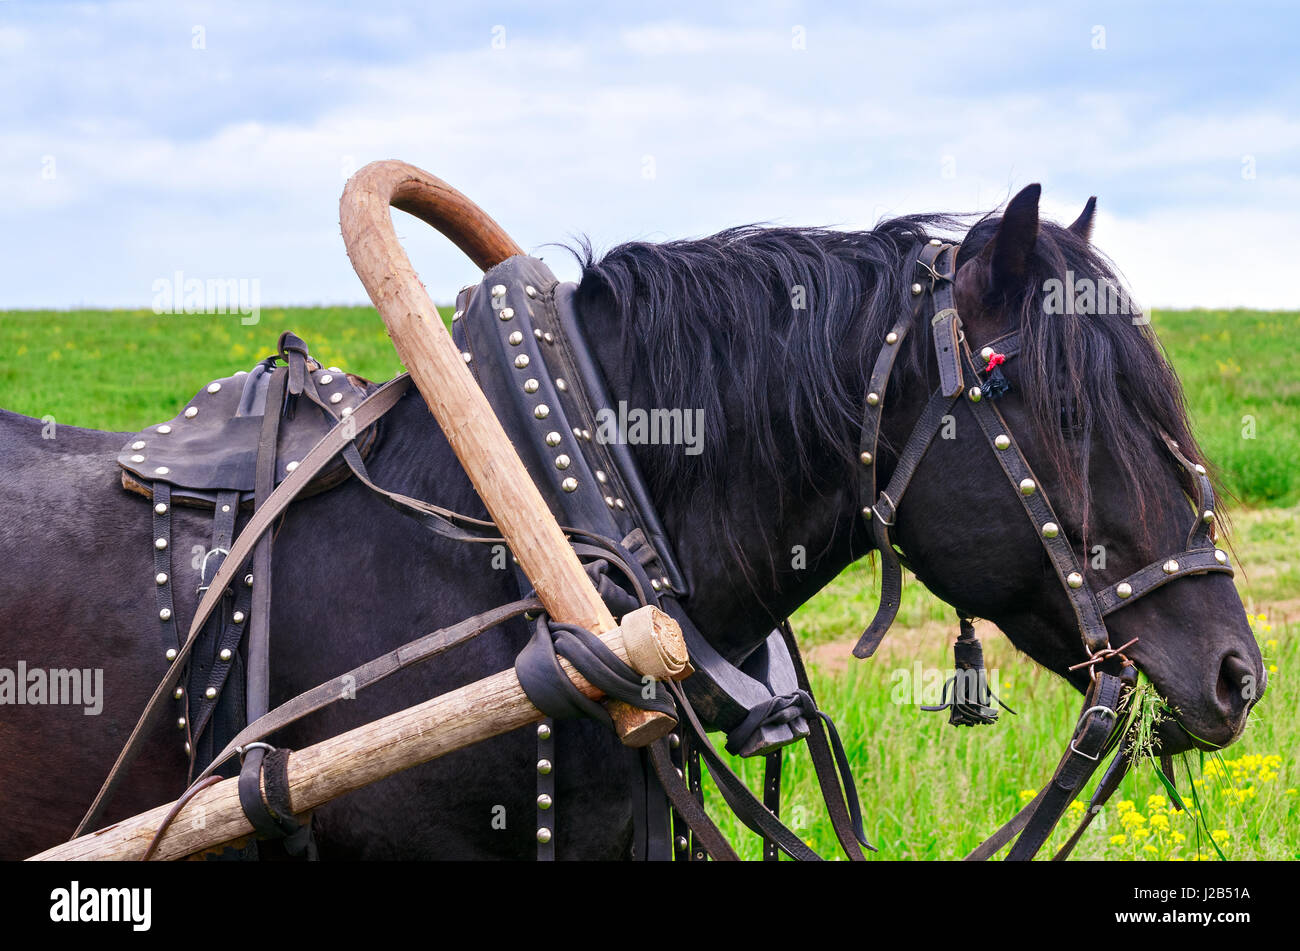 The working horse in harness Stock Photo